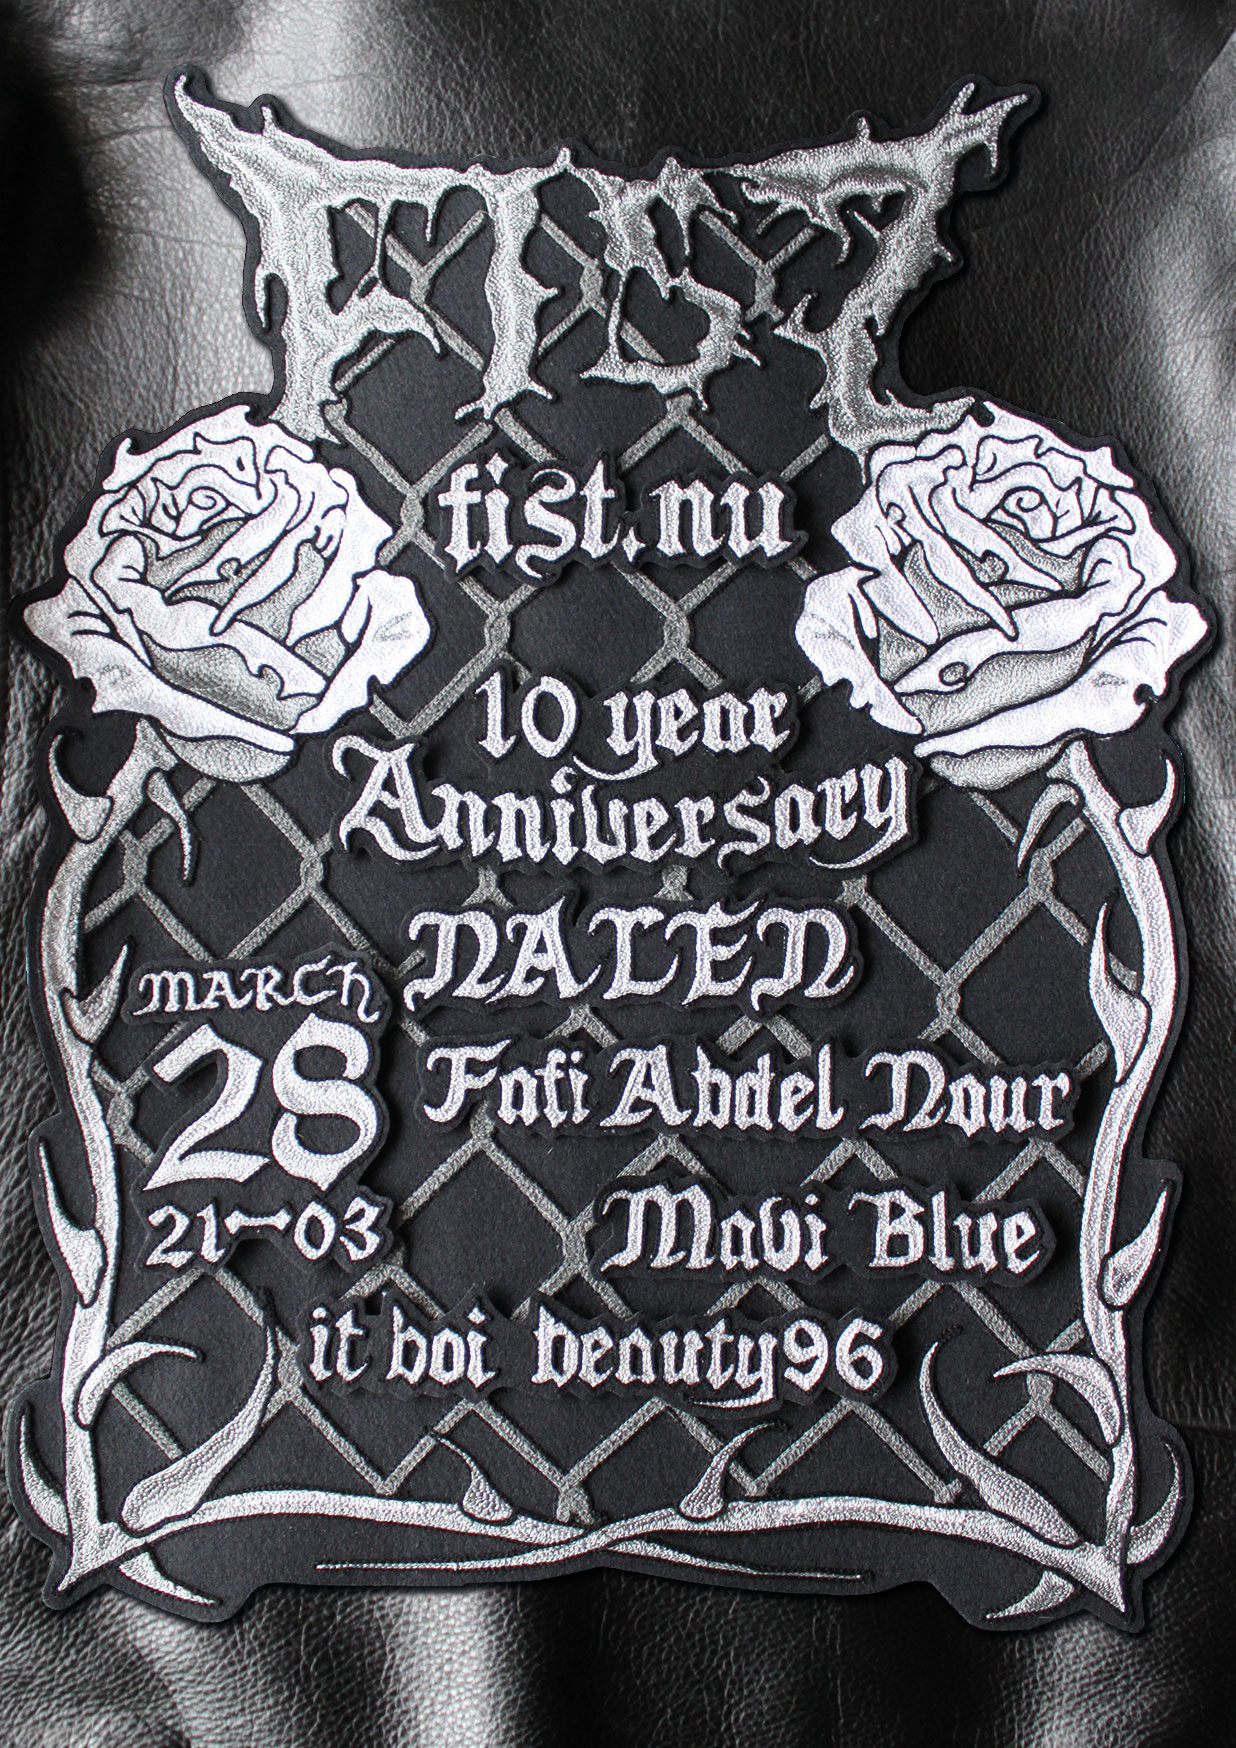 Poster for FIST 10 Year Anniversary